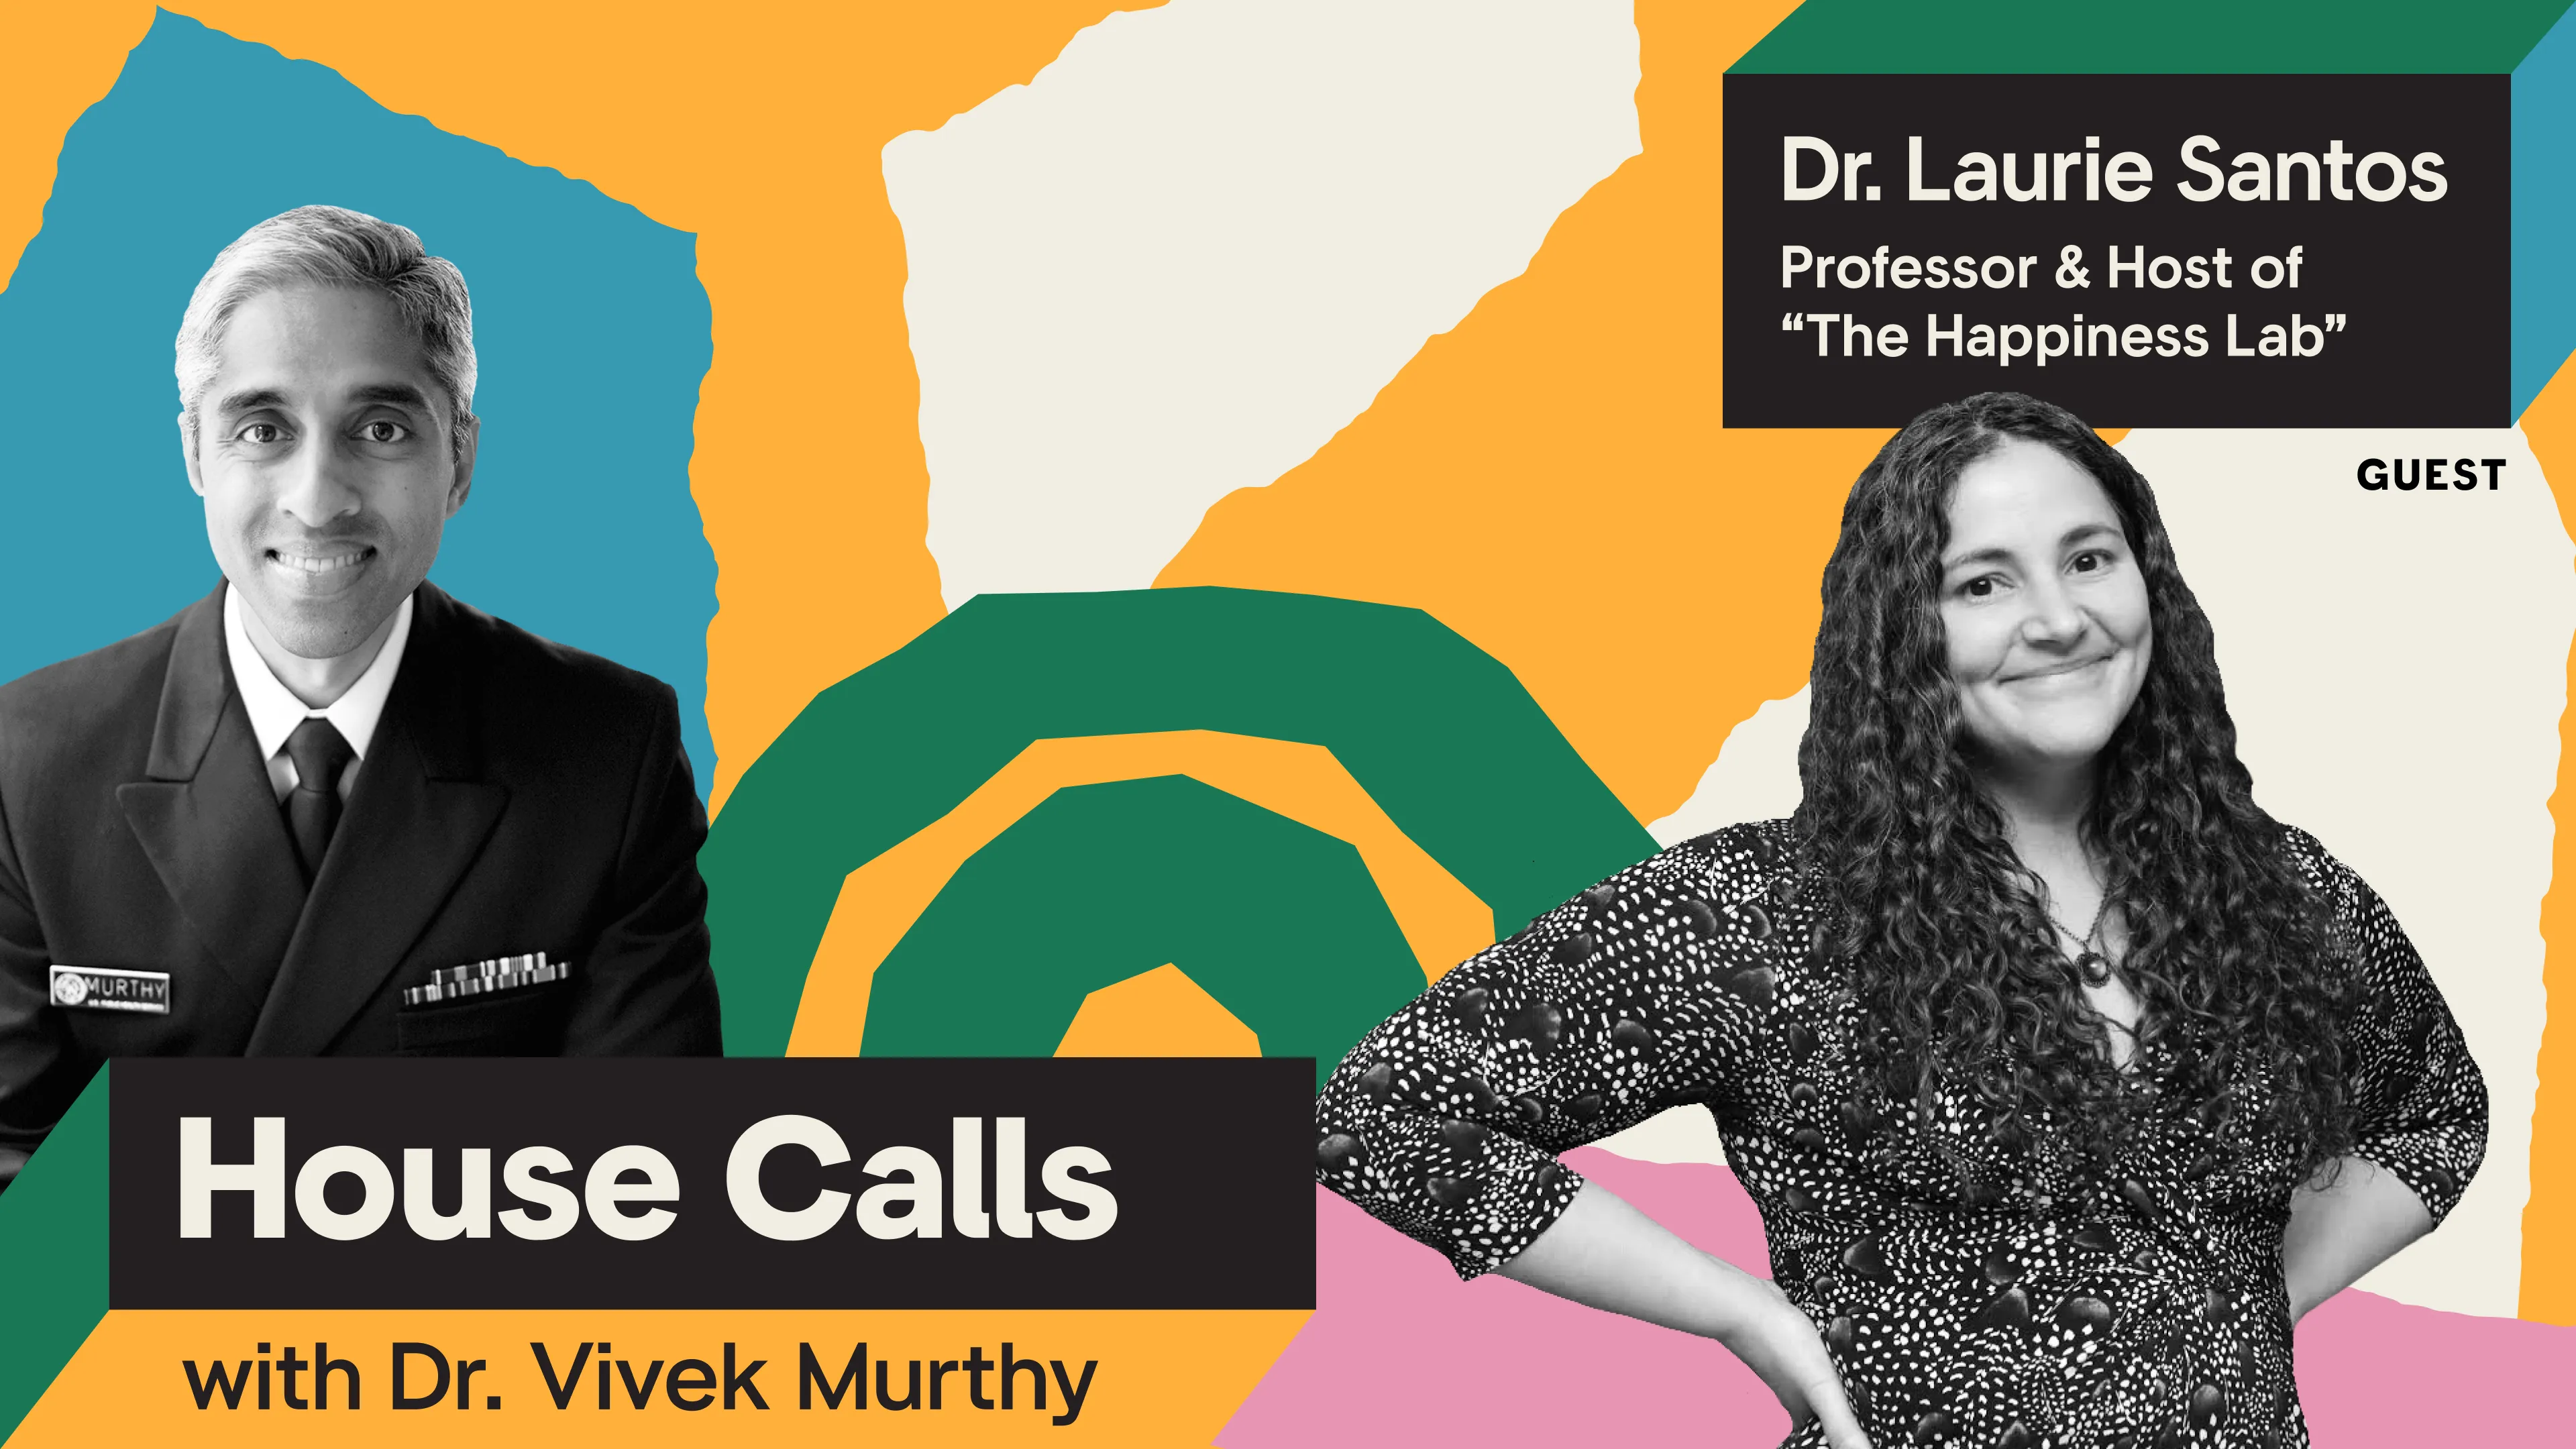 Black and white portraits of Surgeon General Vivek Murthy and Dr. Laurie Santos with a colorful background.